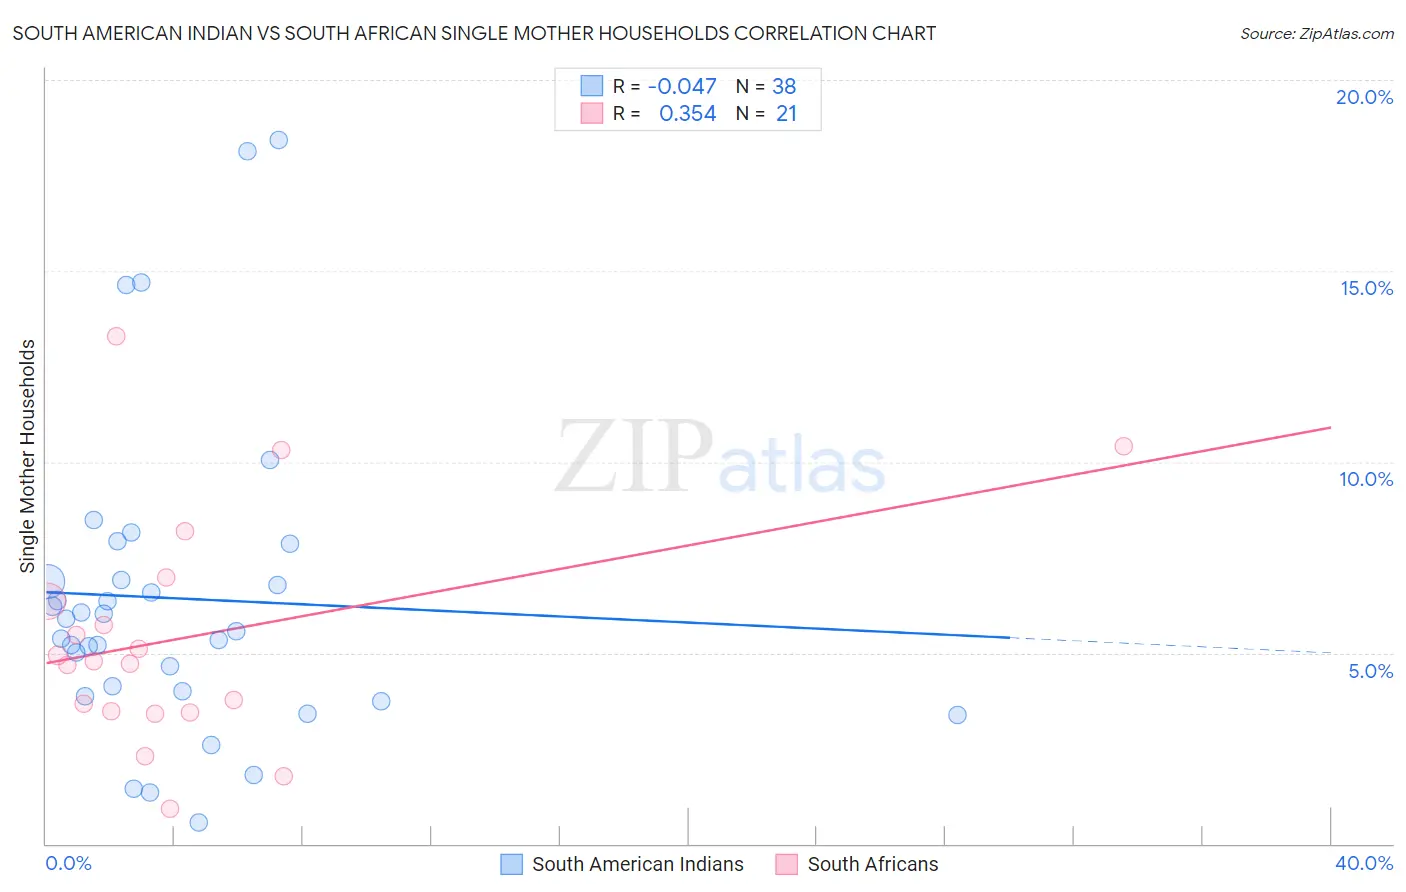 South American Indian vs South African Single Mother Households